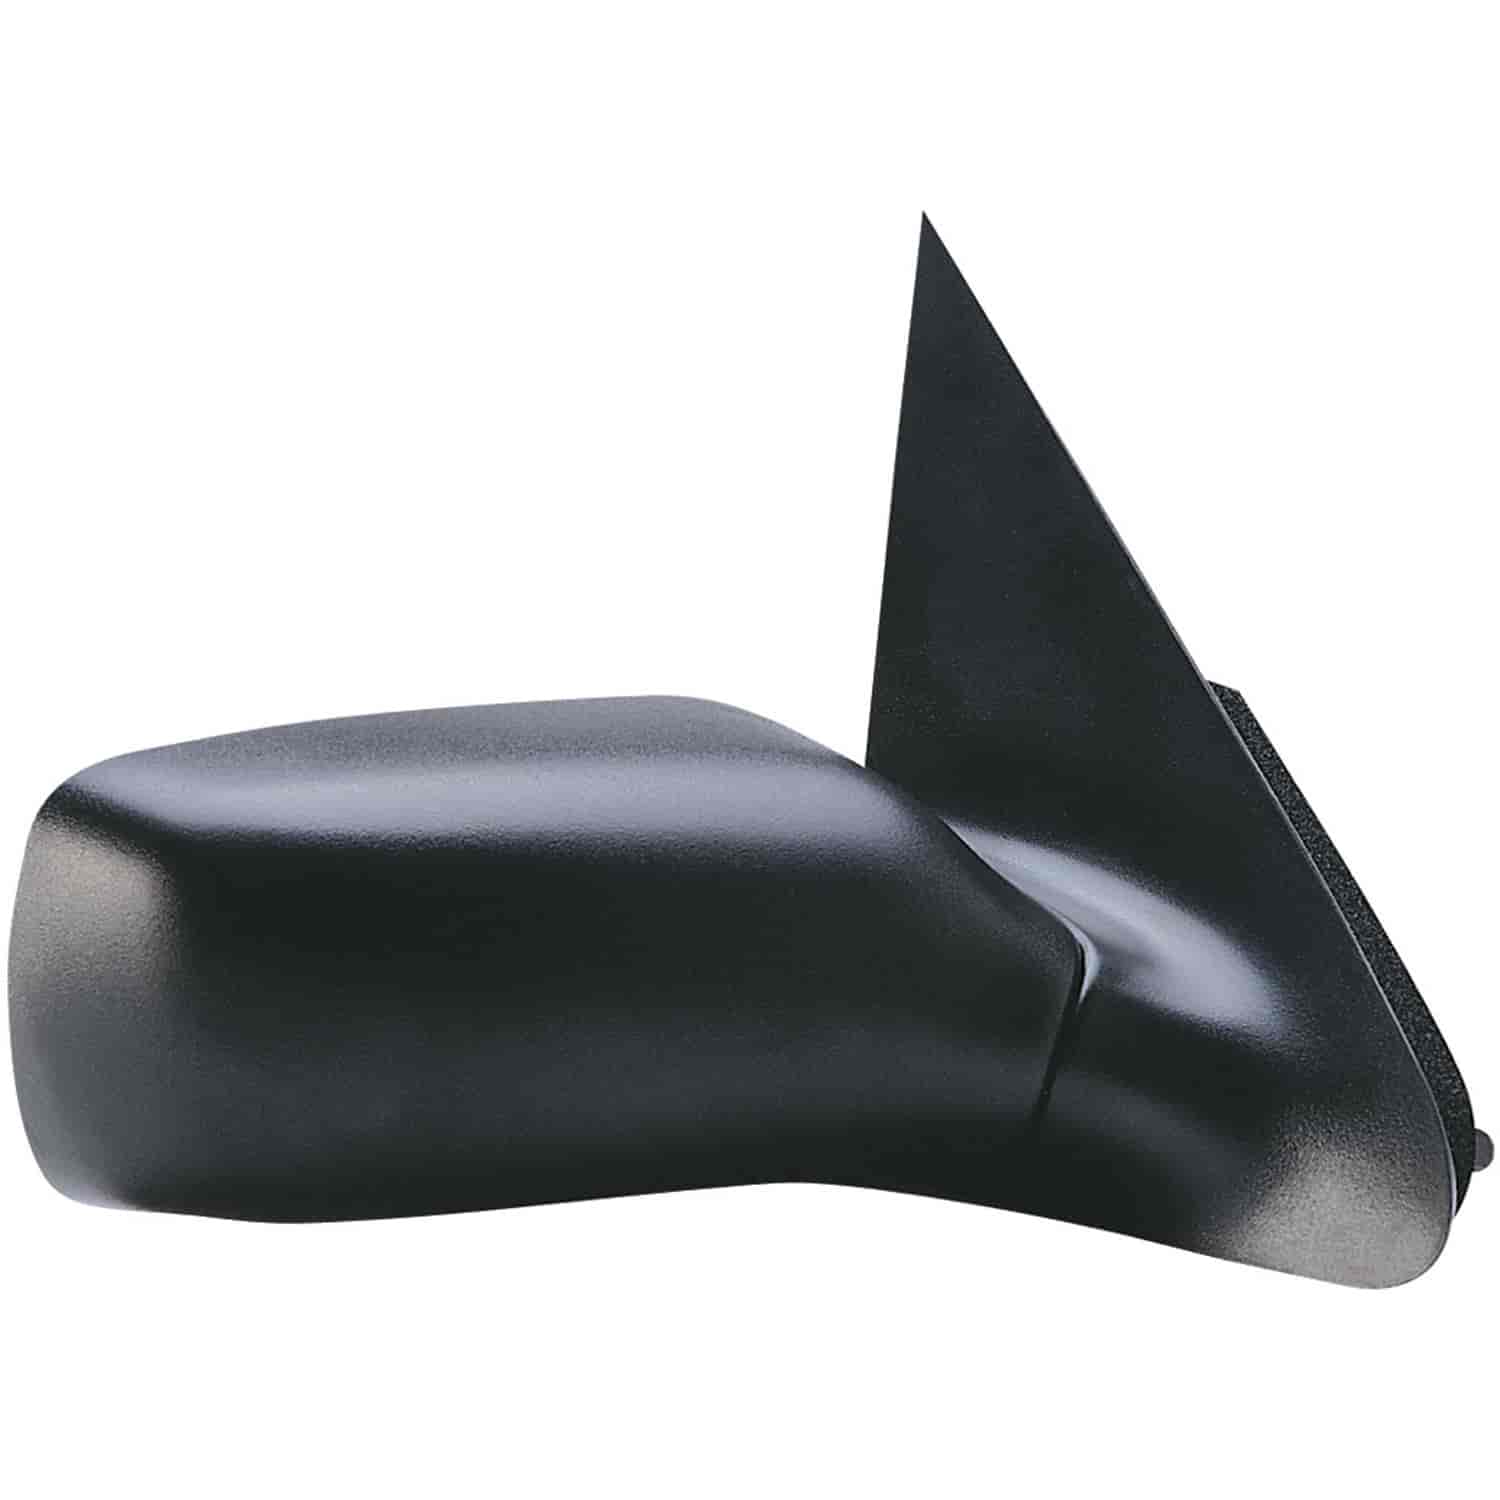 OEM Style Replacement mirror for 95-96 Ford Contour Mercury Mystique passenger side mirror tested to